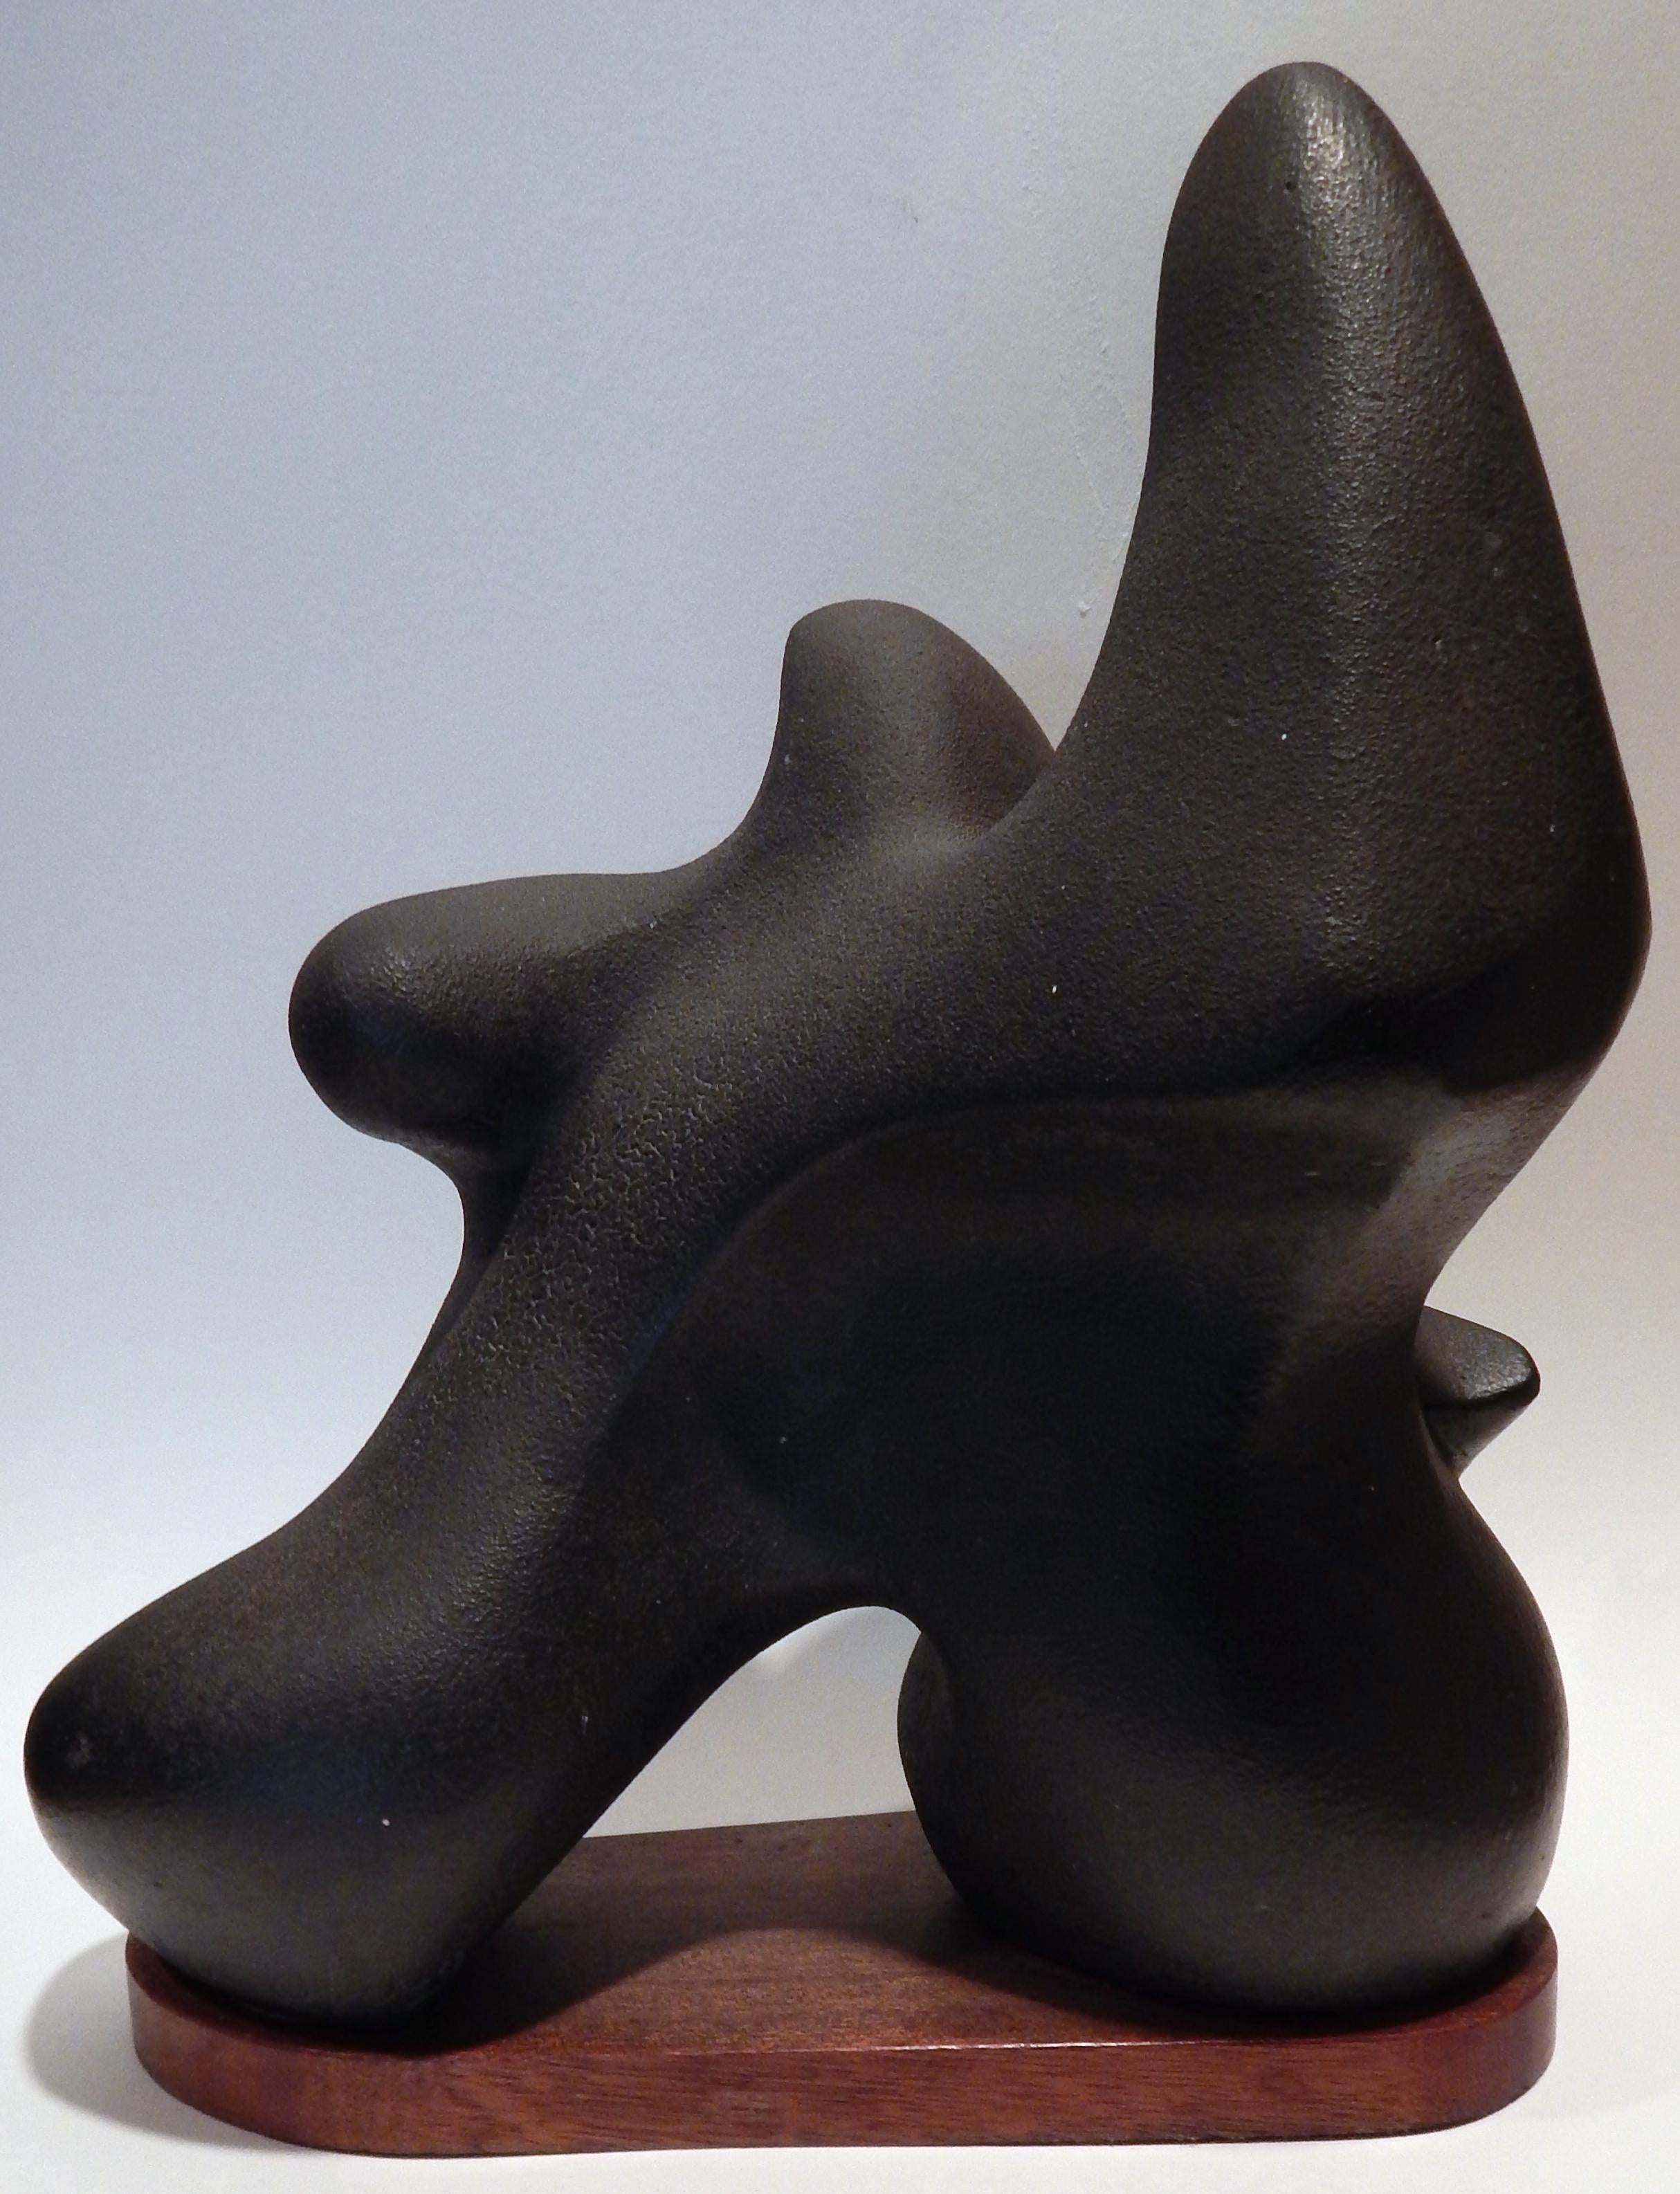 Ellen Key Oberg exhibited with all the major artists of her time including
Alexancer Archipenko and William Zorach.
This piece received an honorable mention in one of the many exhibitions
she participated in.
It's a large Modern ceramic